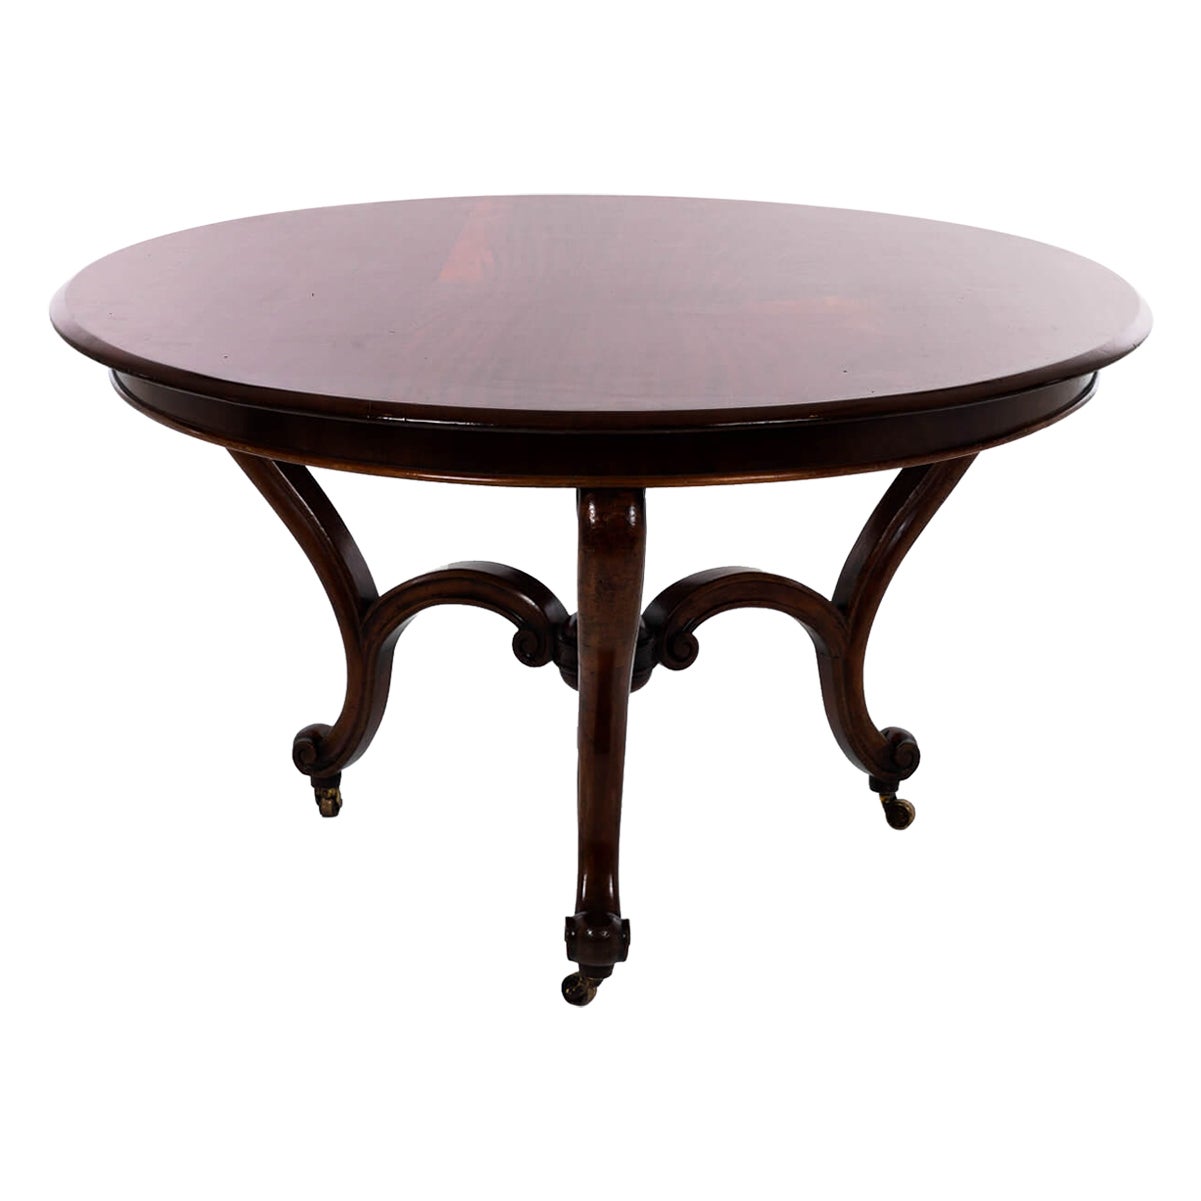 Mid-19th Century Fruitwood Centre Table, circa 1850